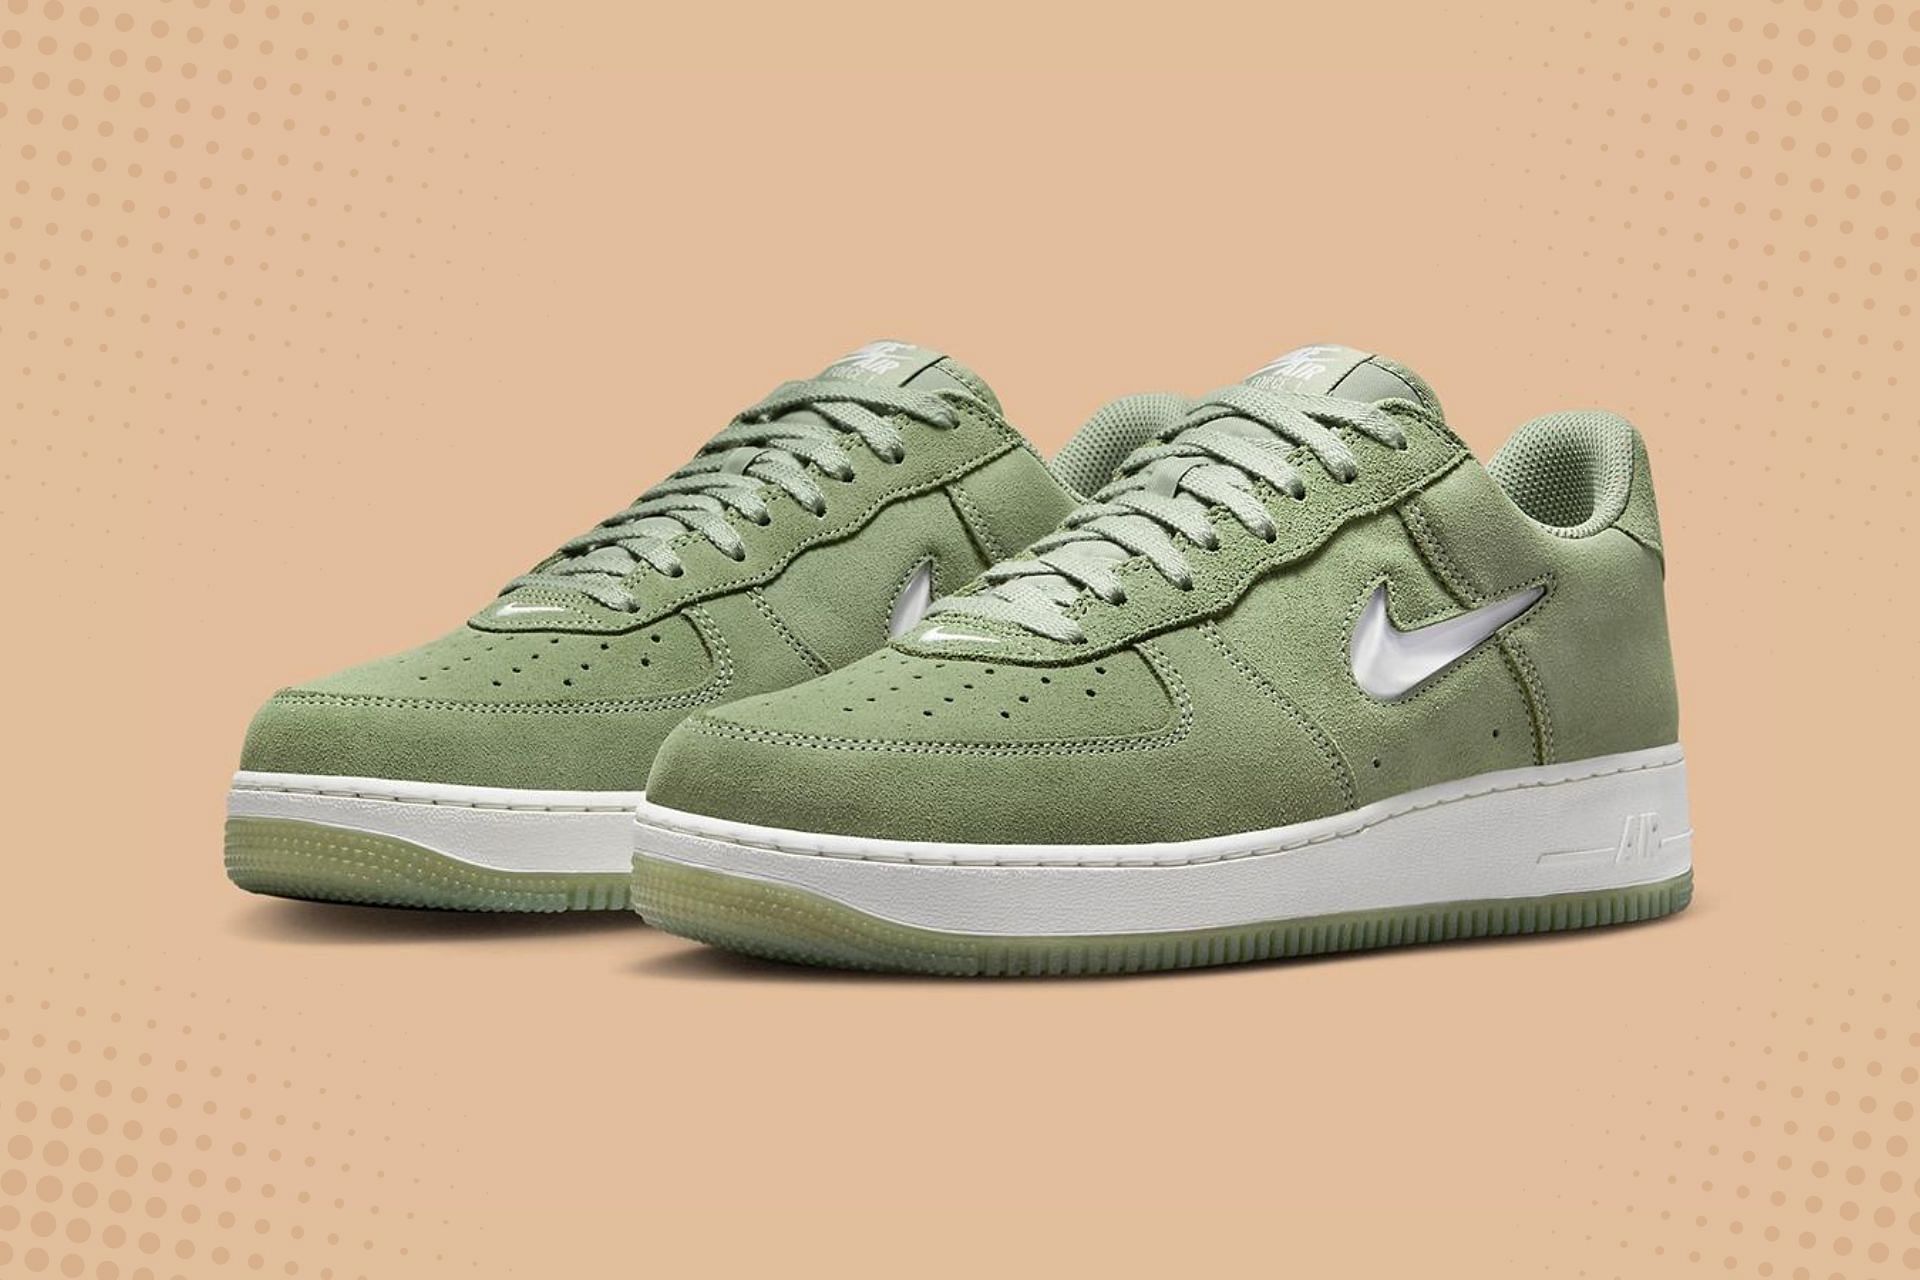 Take a closer look at the upcoming Oil Green Nike Air Force 1 Low sneakers (Image via Nike)